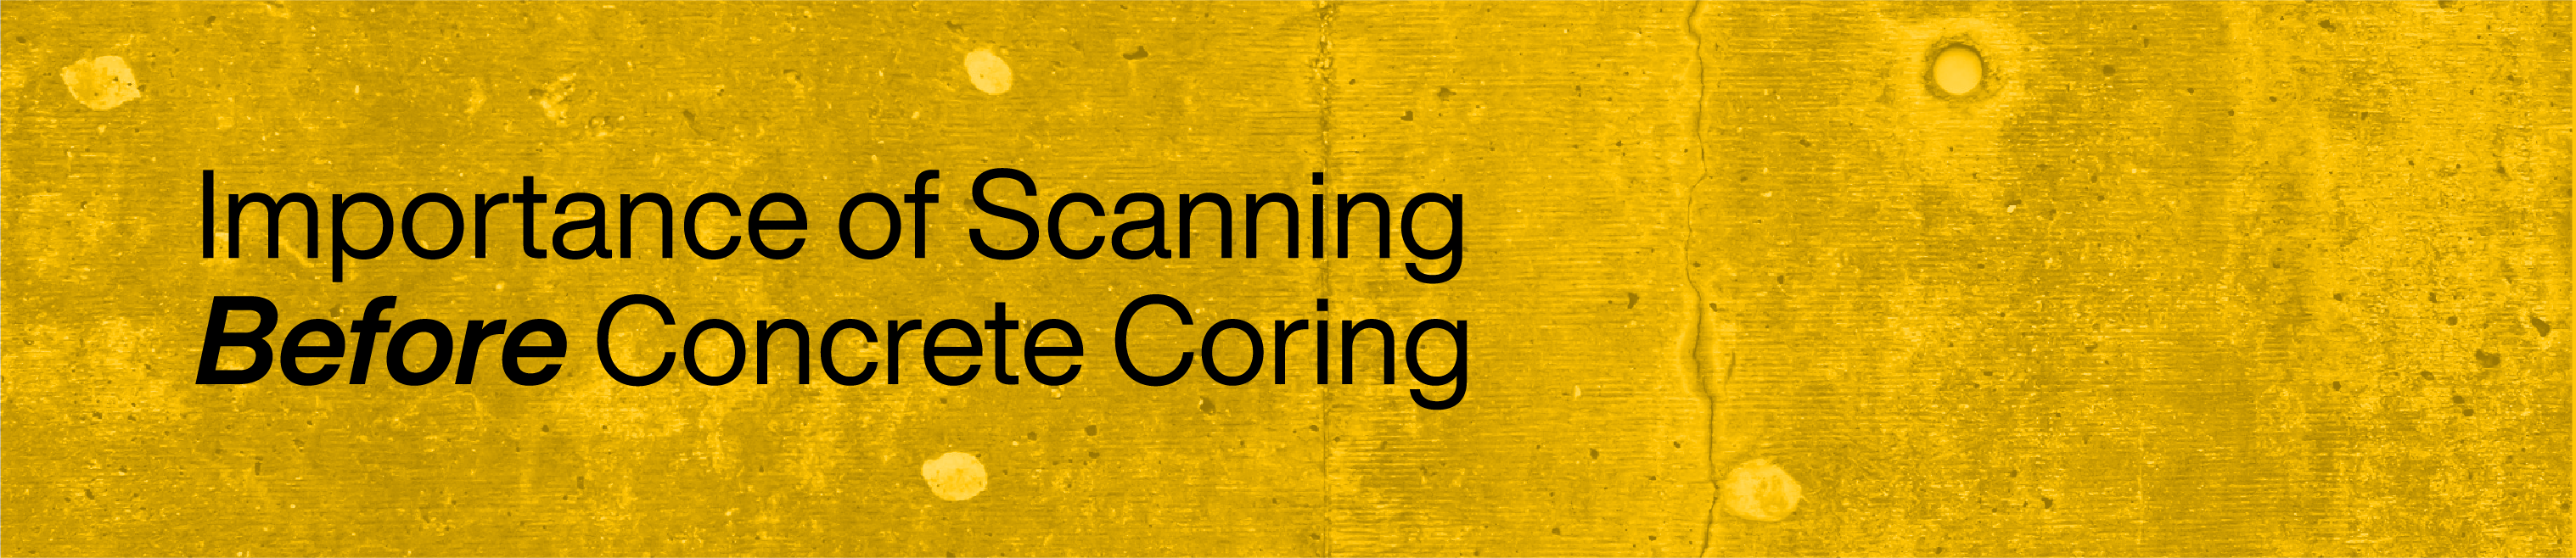 Importance of Scanning Before Concrete Coring